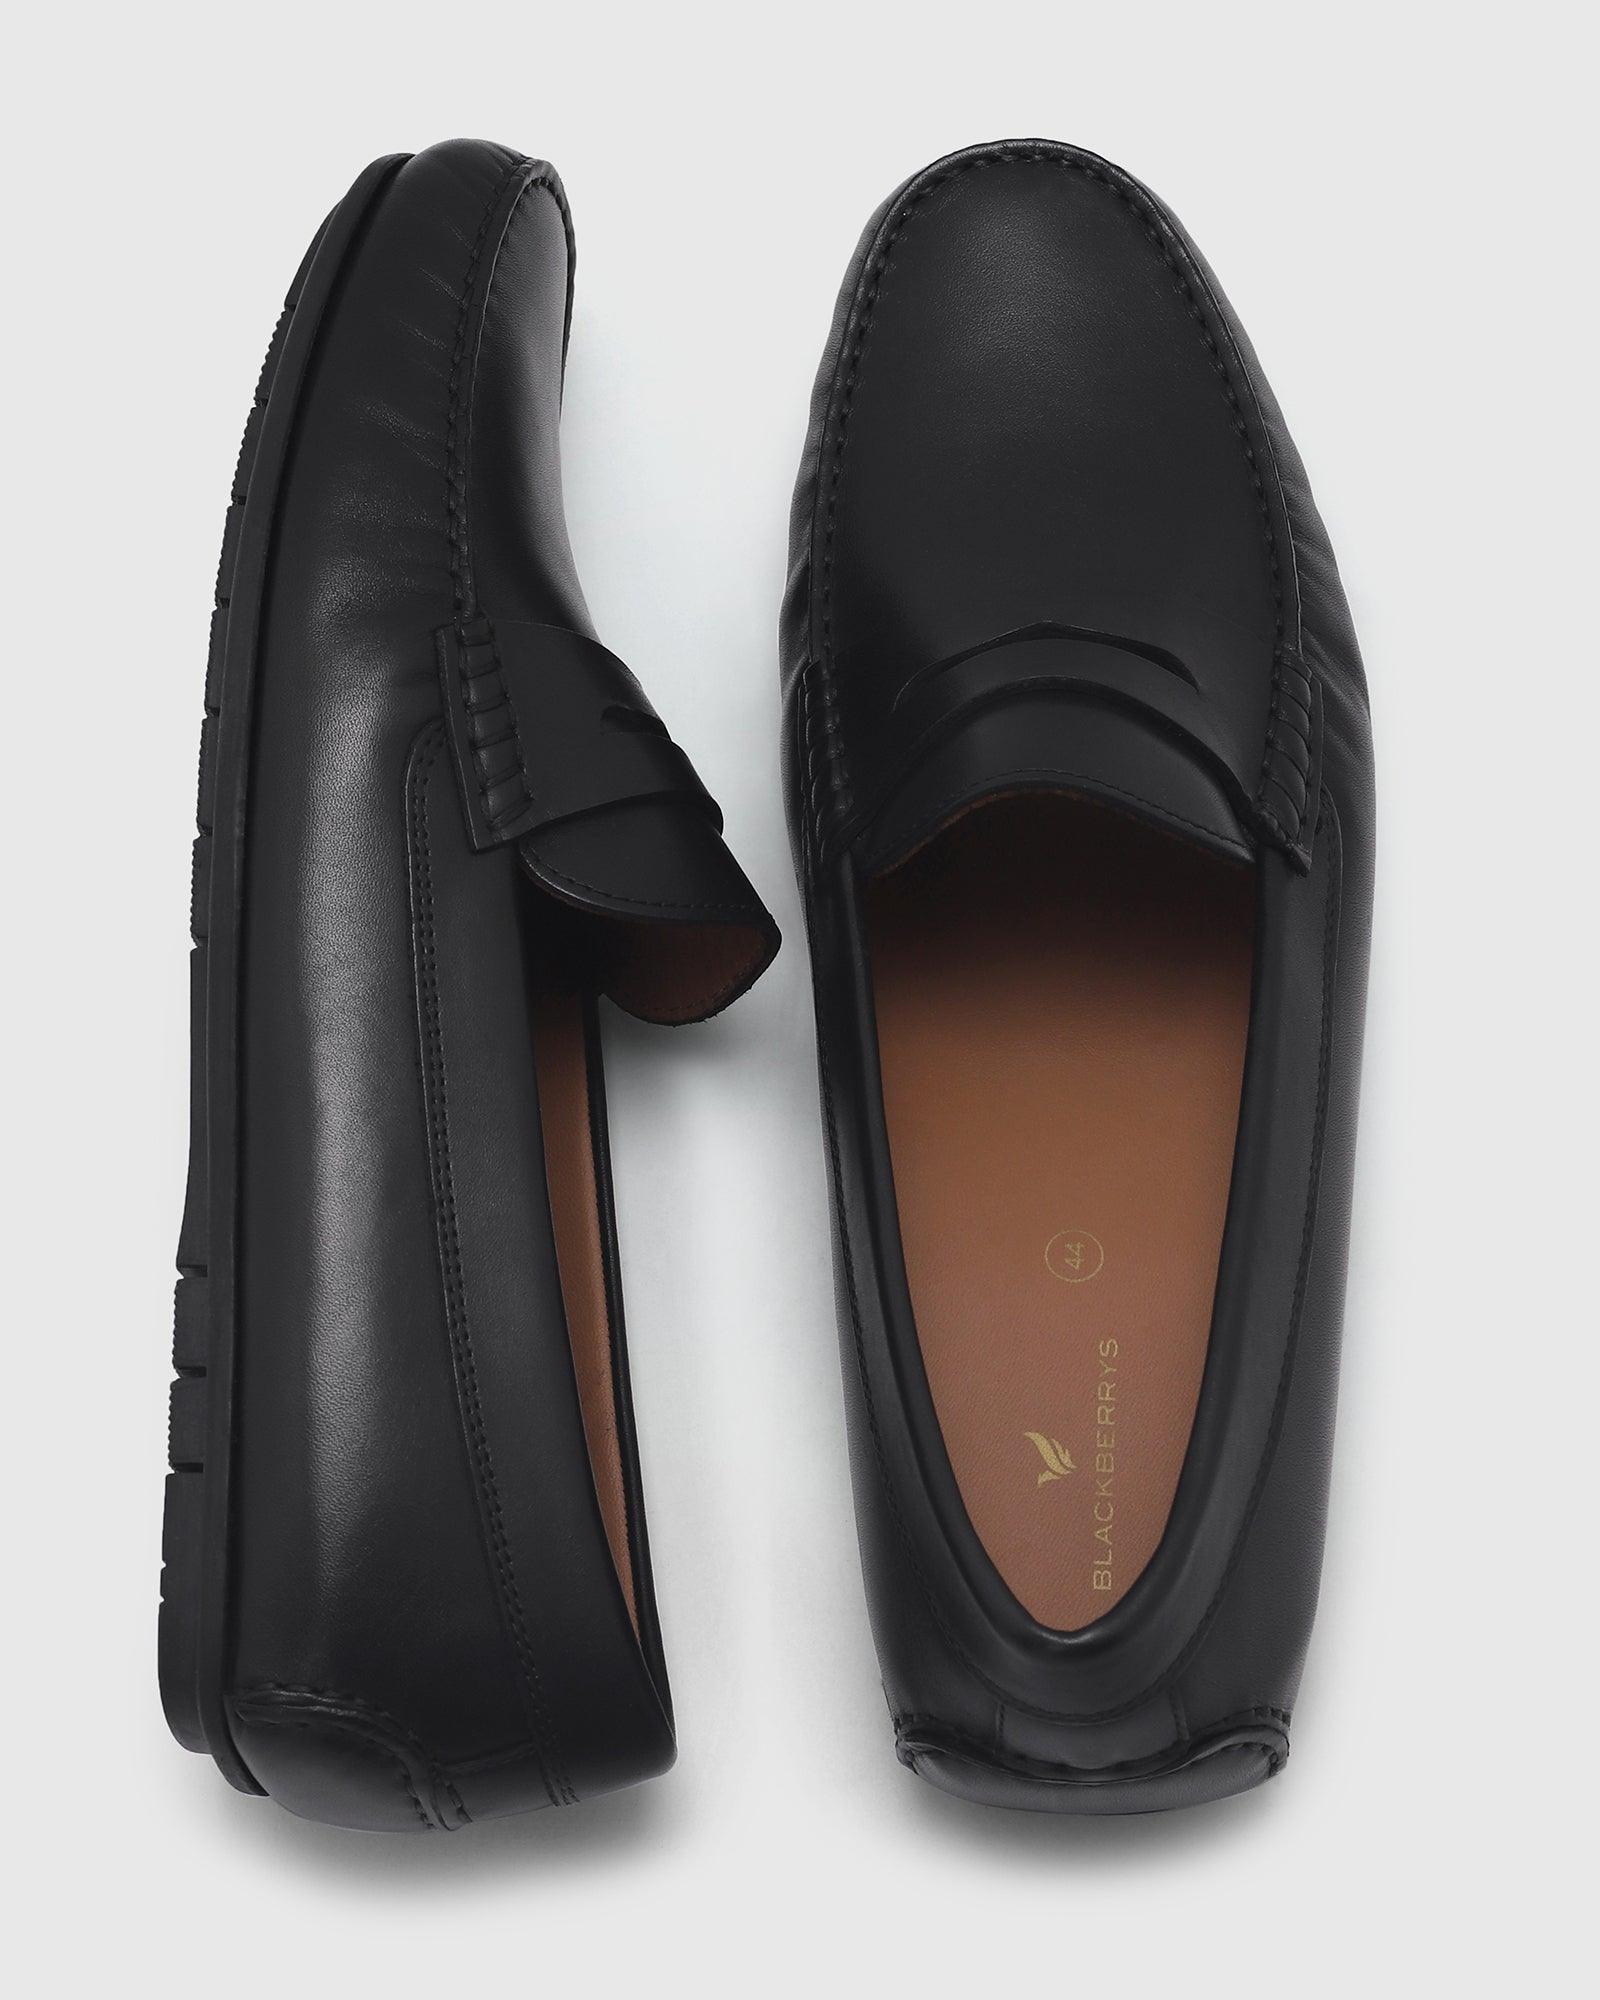 Leather Casual Black Solid Loafers Shoes - Park